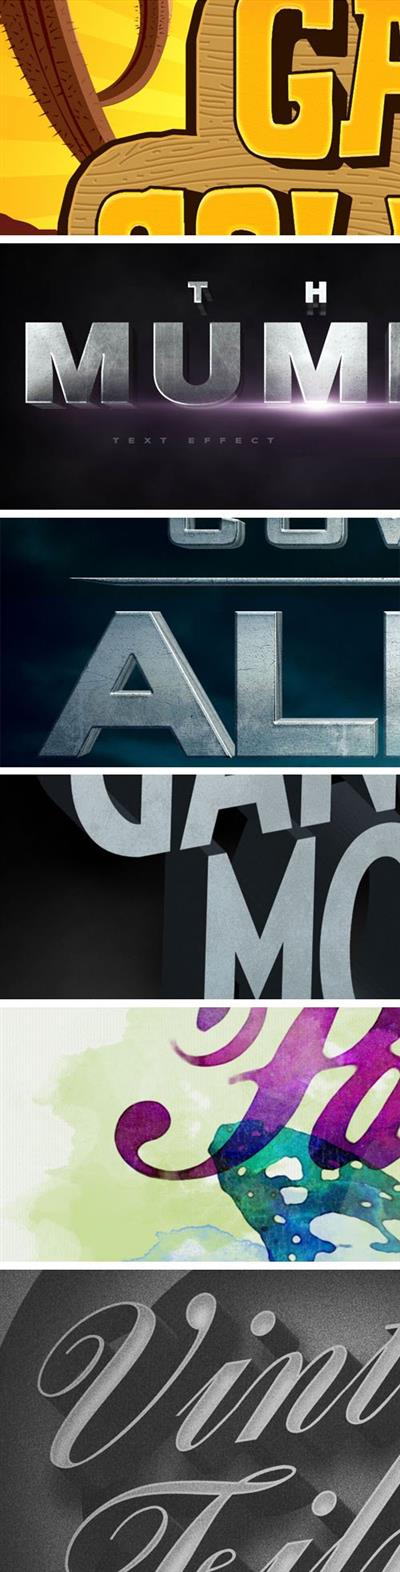 9 Awesome Photoshop Text Effects